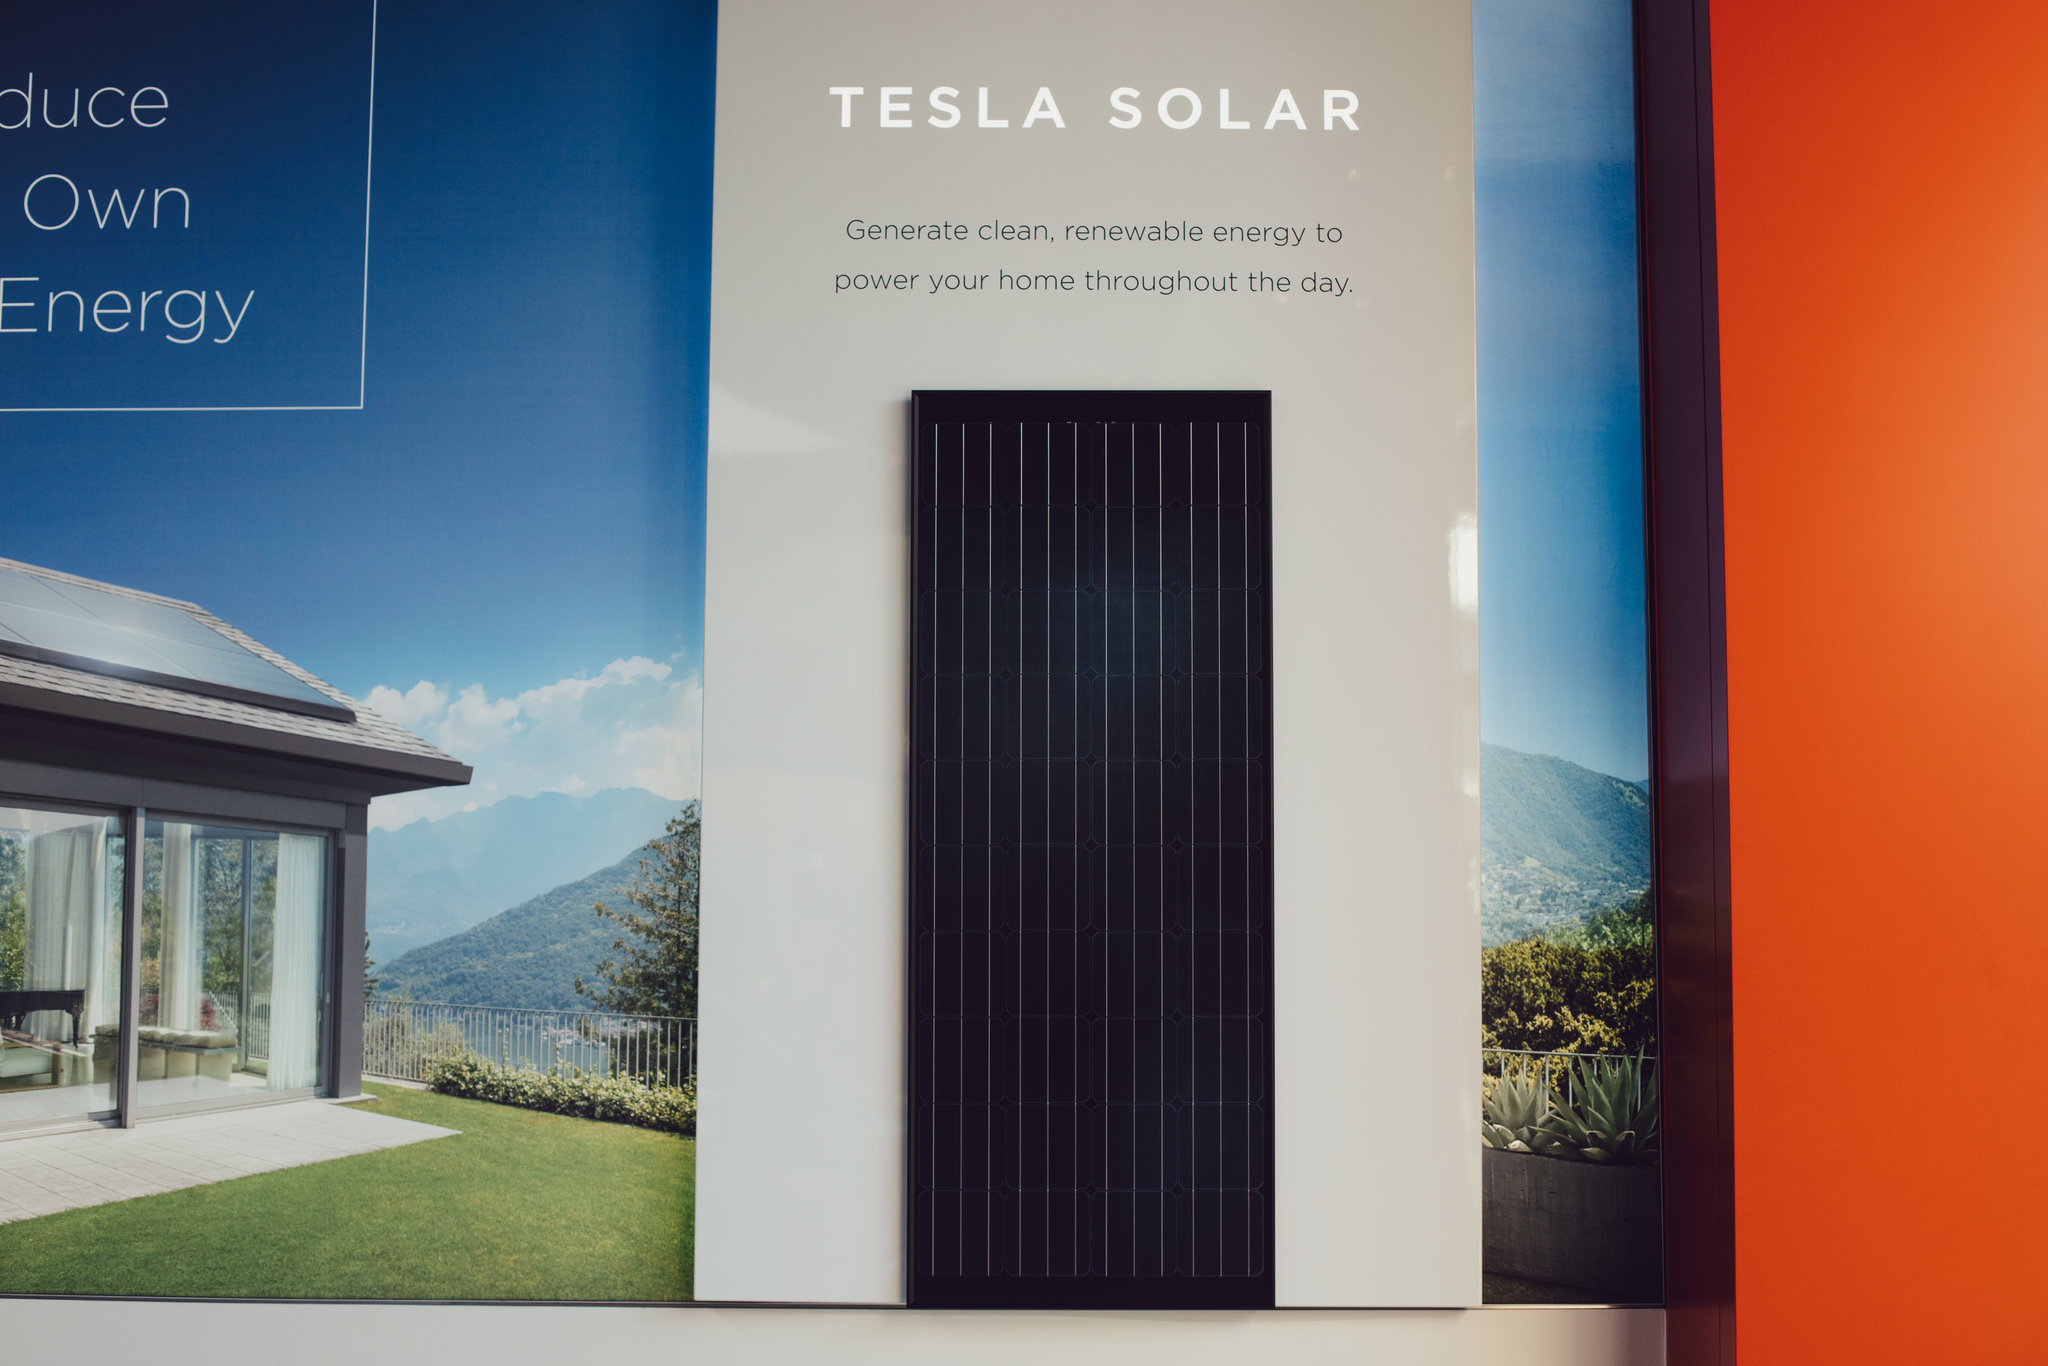 Tesla’s Solar Installations Decline, But Battery Business Booms